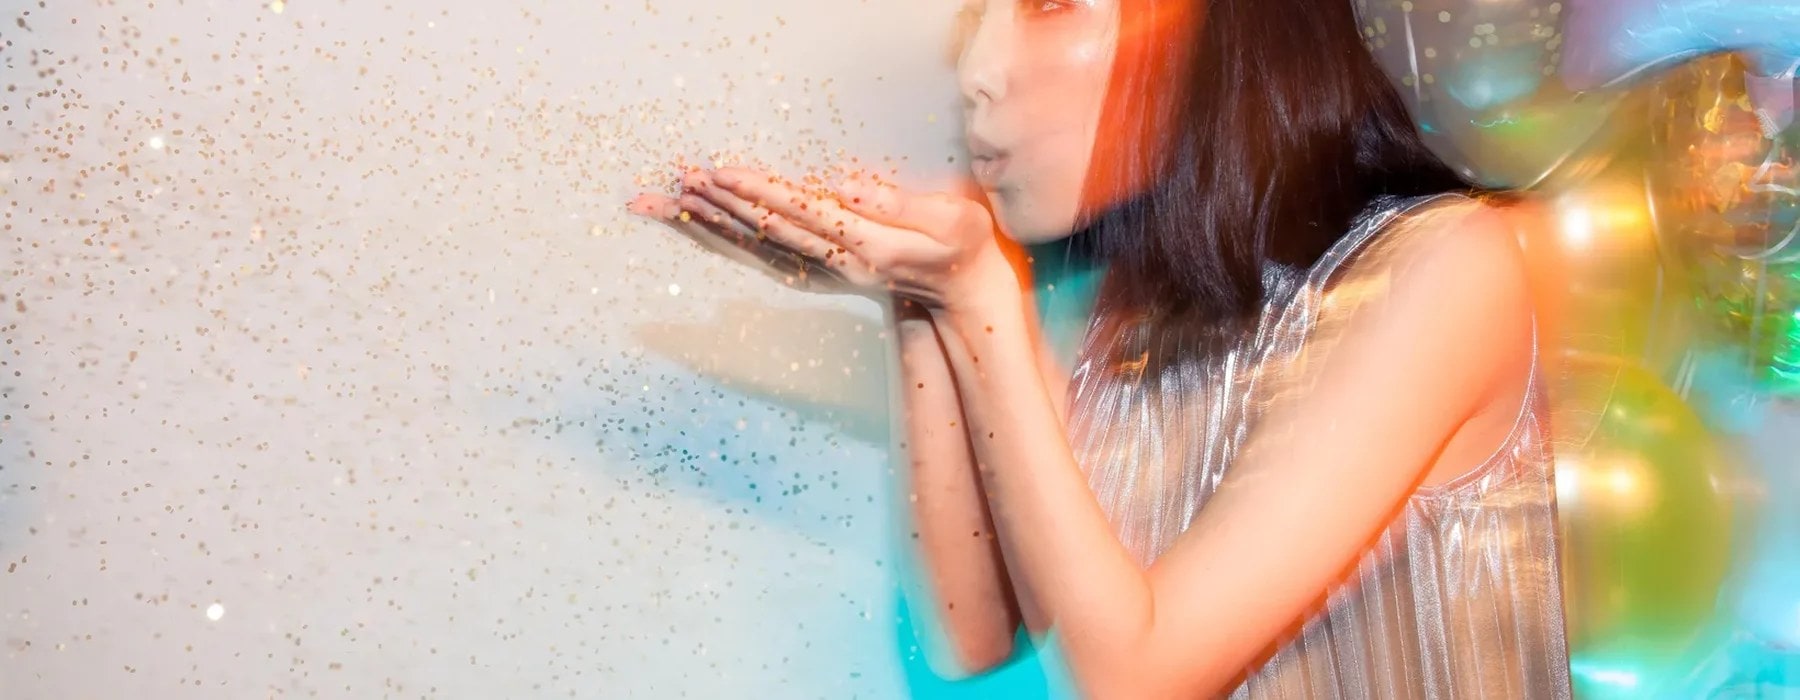 girl blowing colourful confetti dust